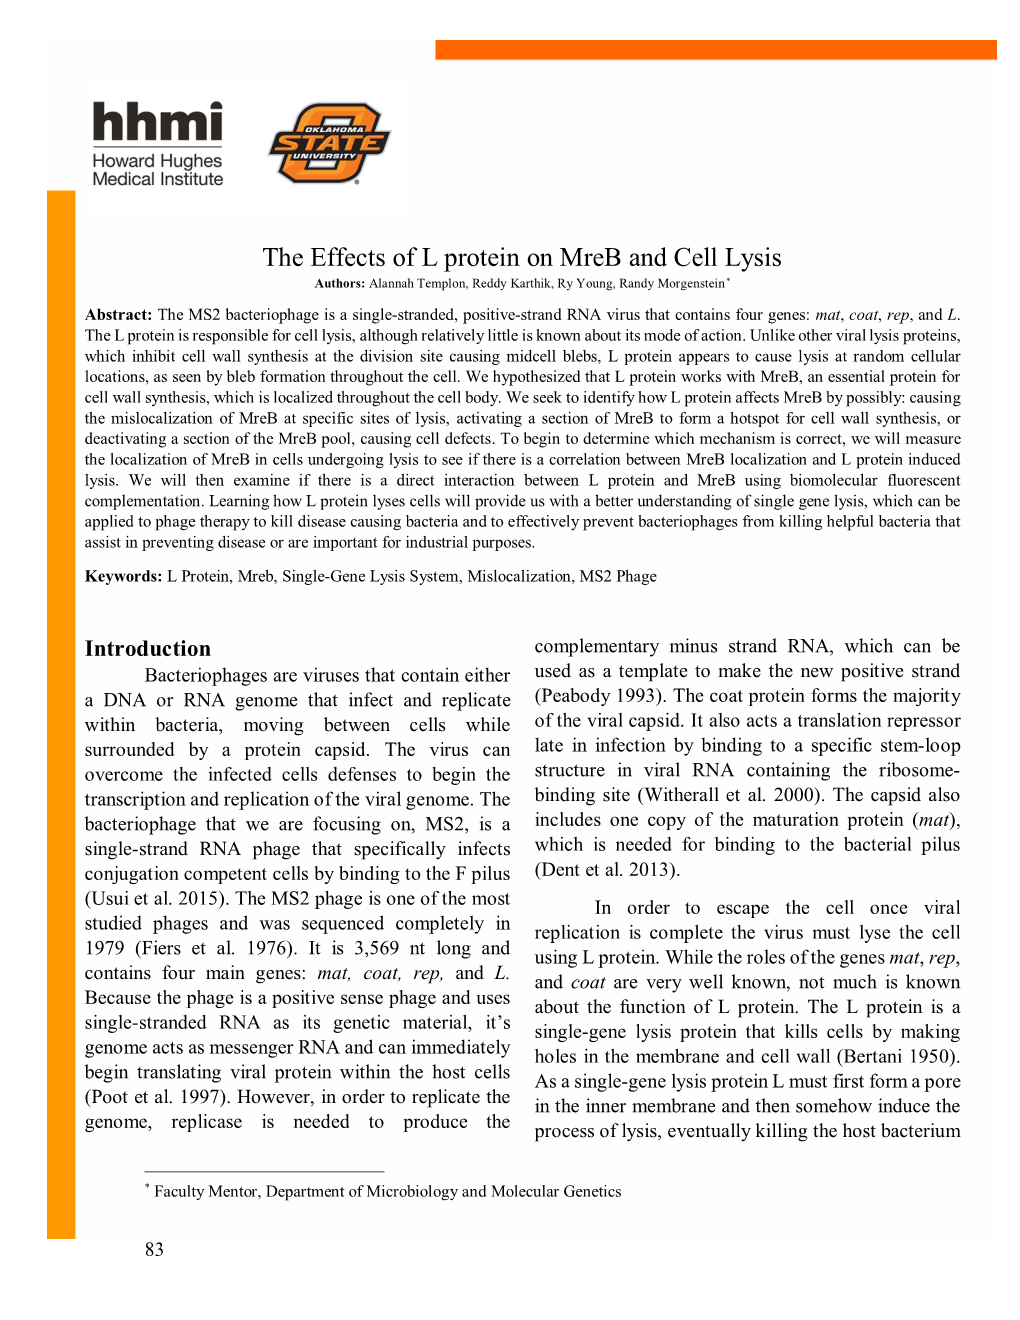 The Effects of L Protein on Mreb and Cell Lysis